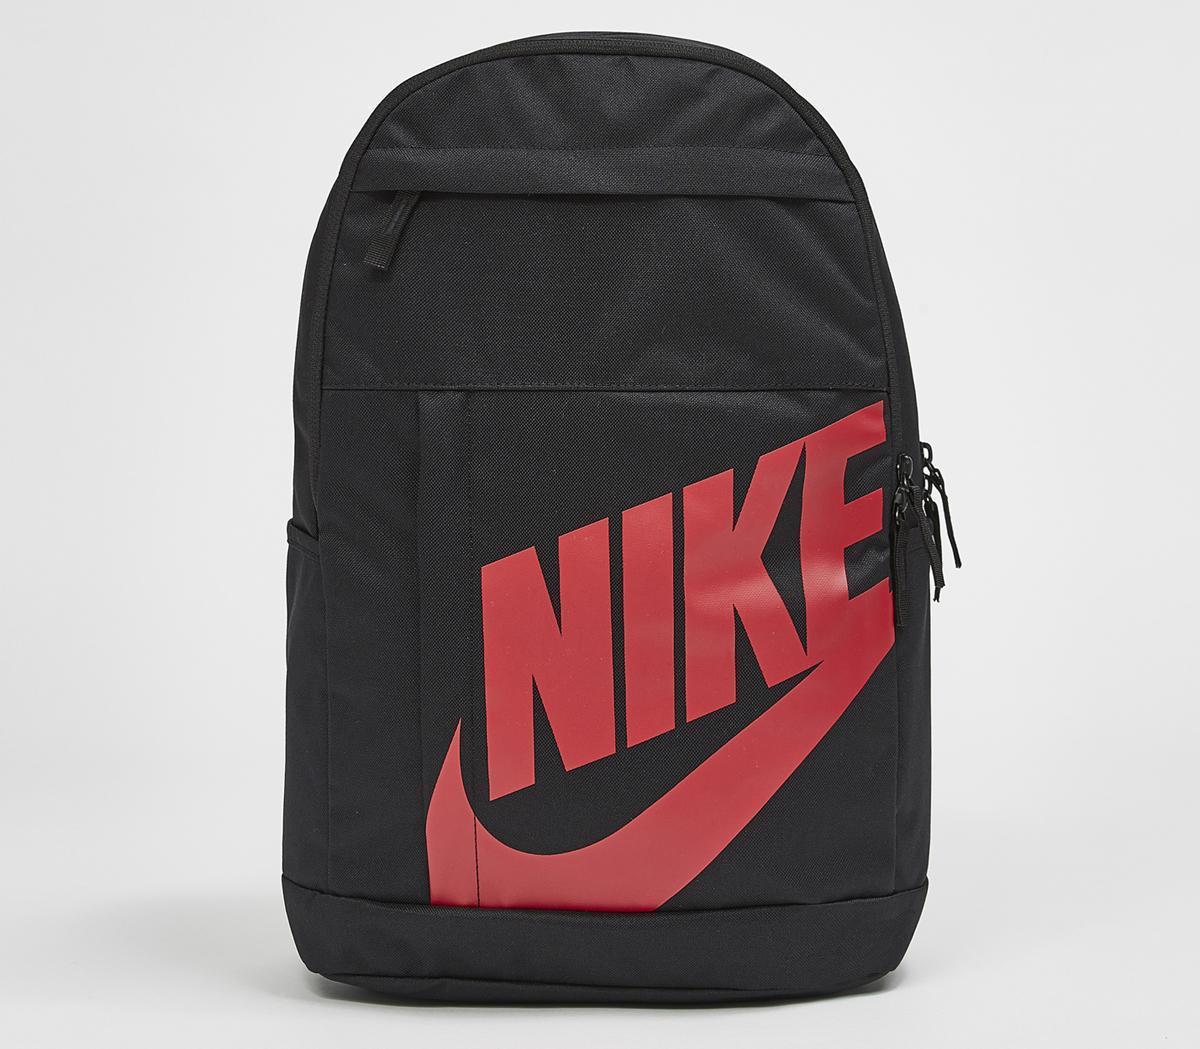 nike bag red and black